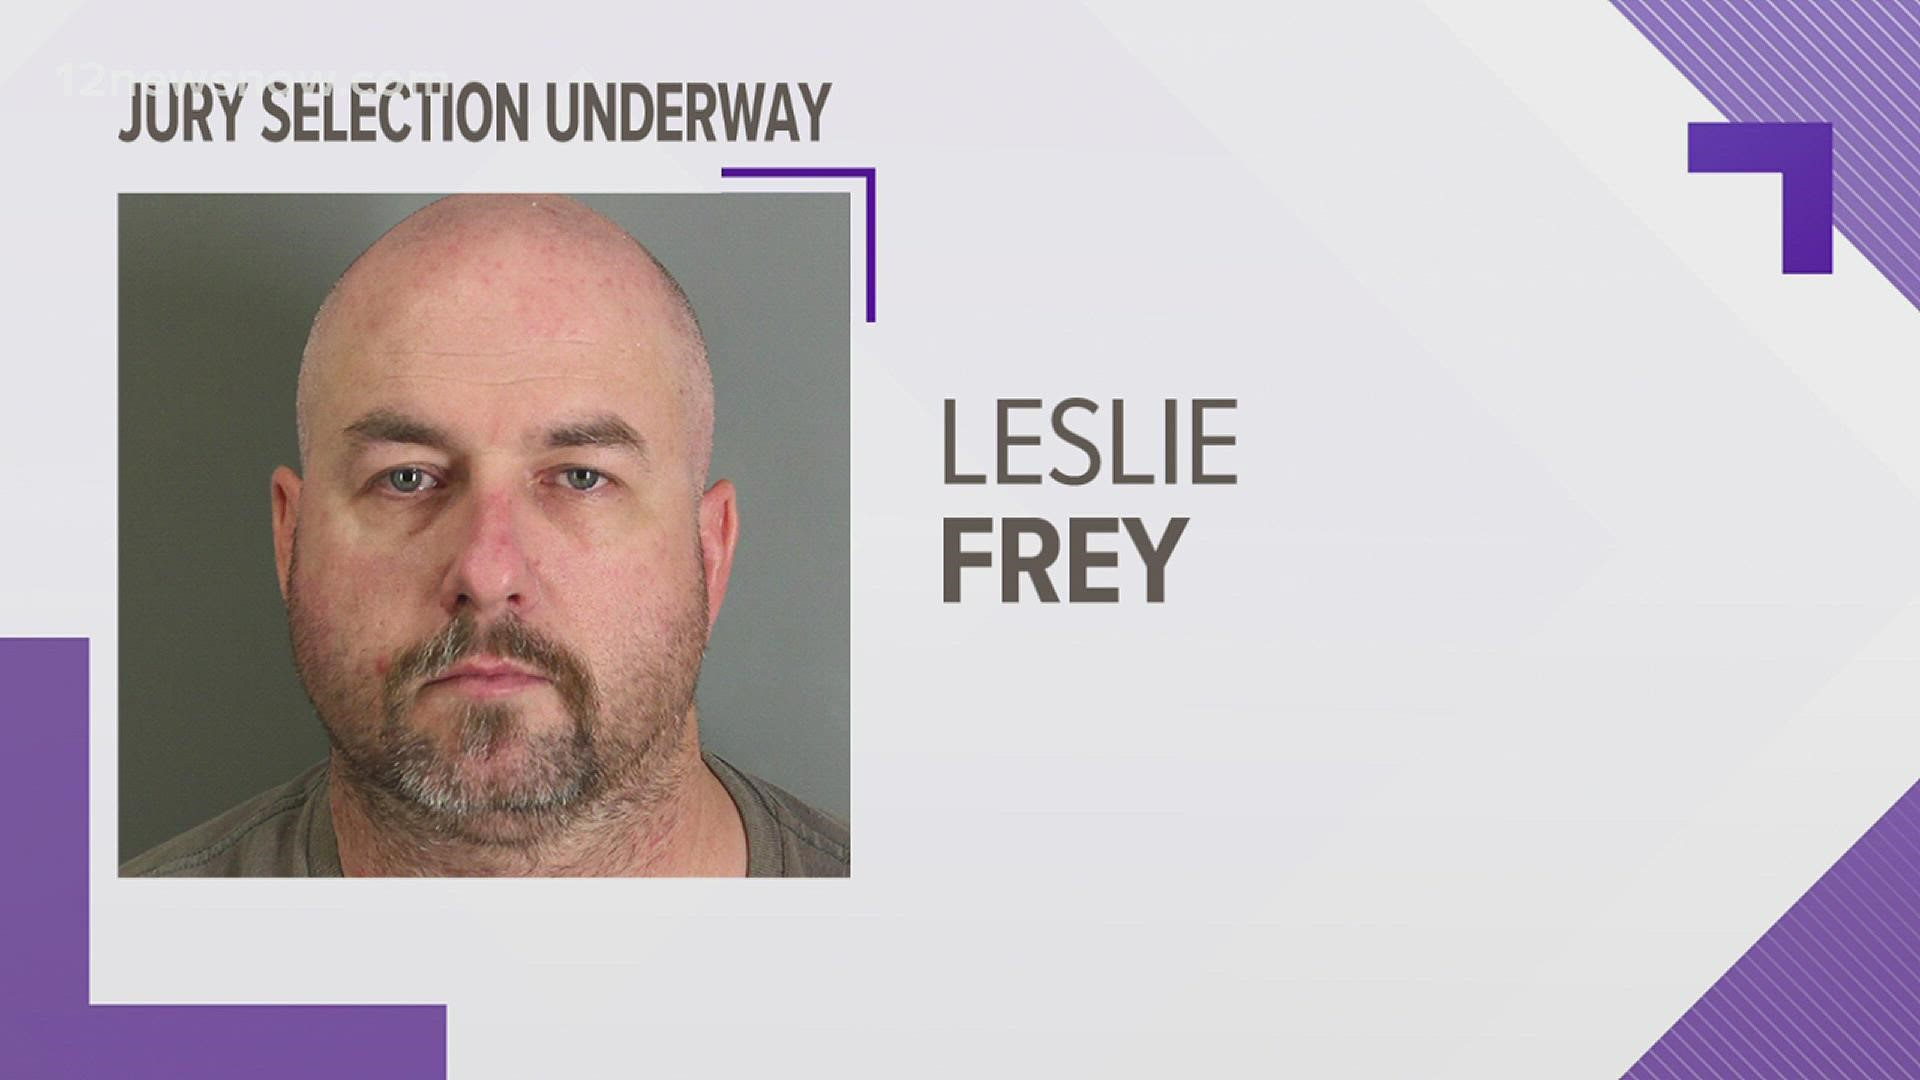 Because the alleged victim is younger than 14, Frey could face anywhere from 25 to 99 years or life in prison if found guilty.